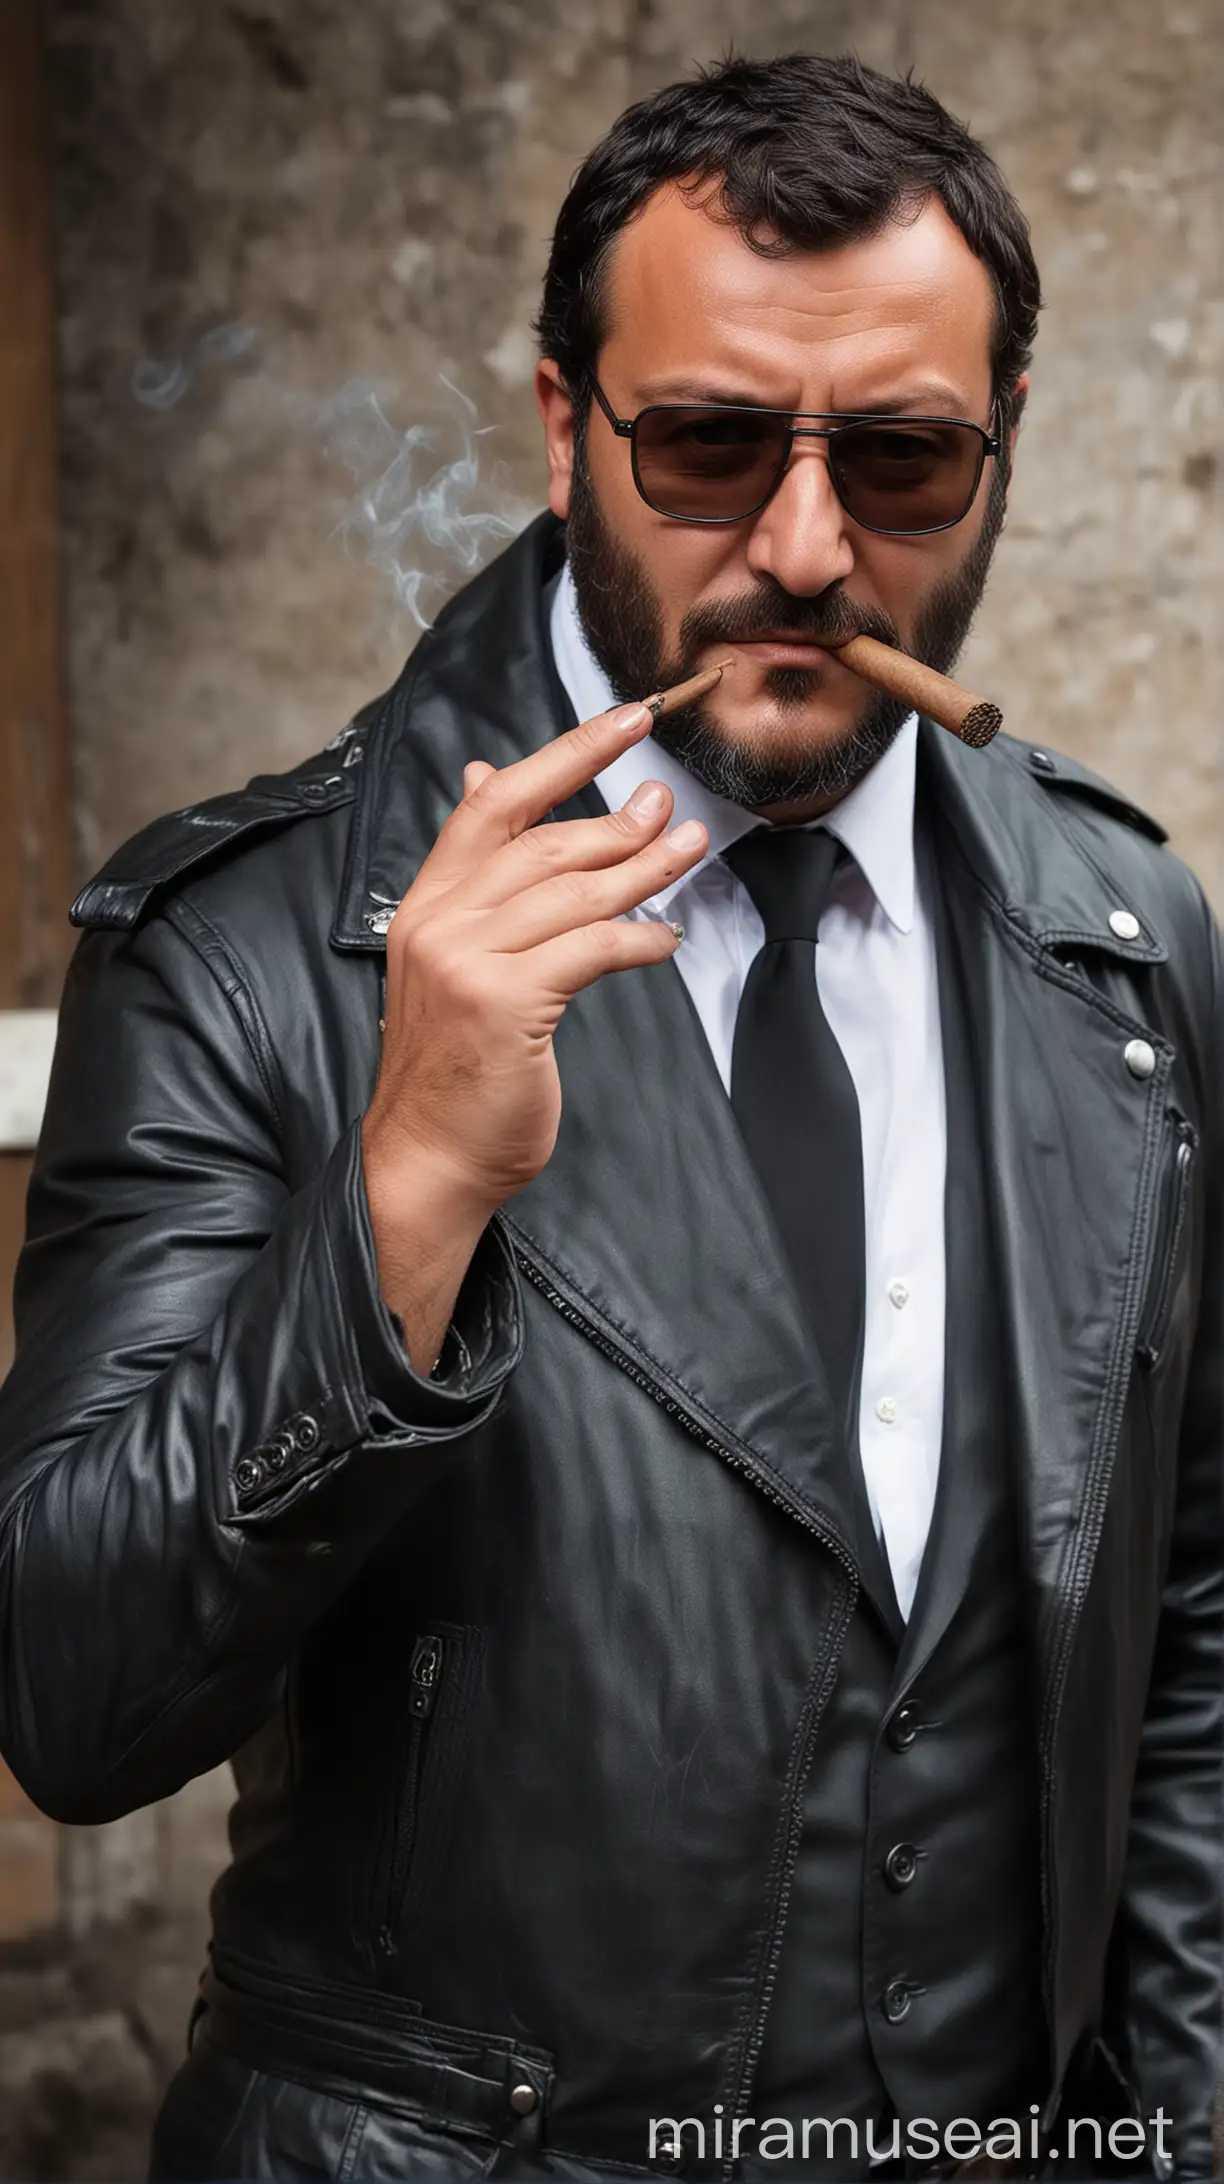 Matteo Salvini Muscled Biker Style with Cigar and Glasses